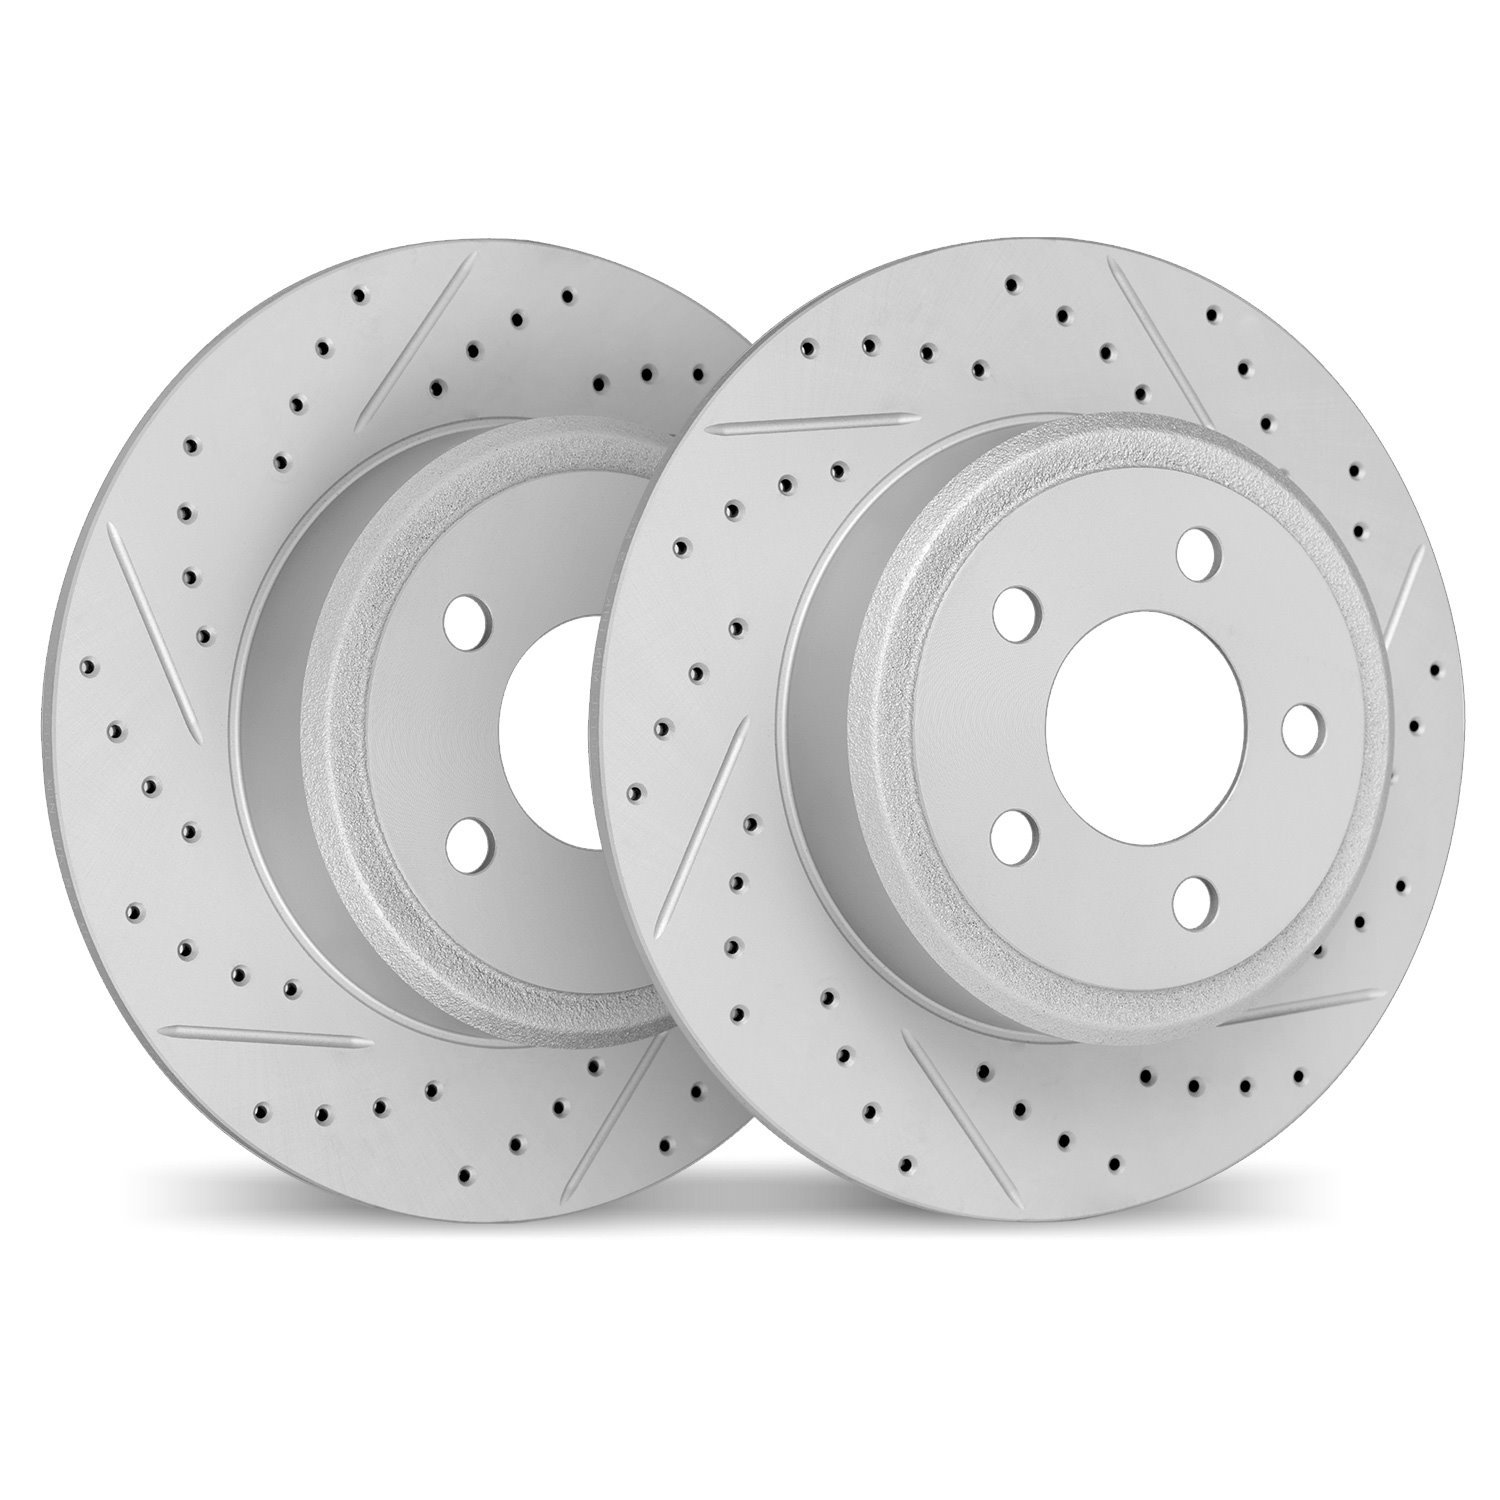 2002-65013 Geoperformance Drilled/Slotted Brake Rotors, 1999-2010 GM, Position: Rear